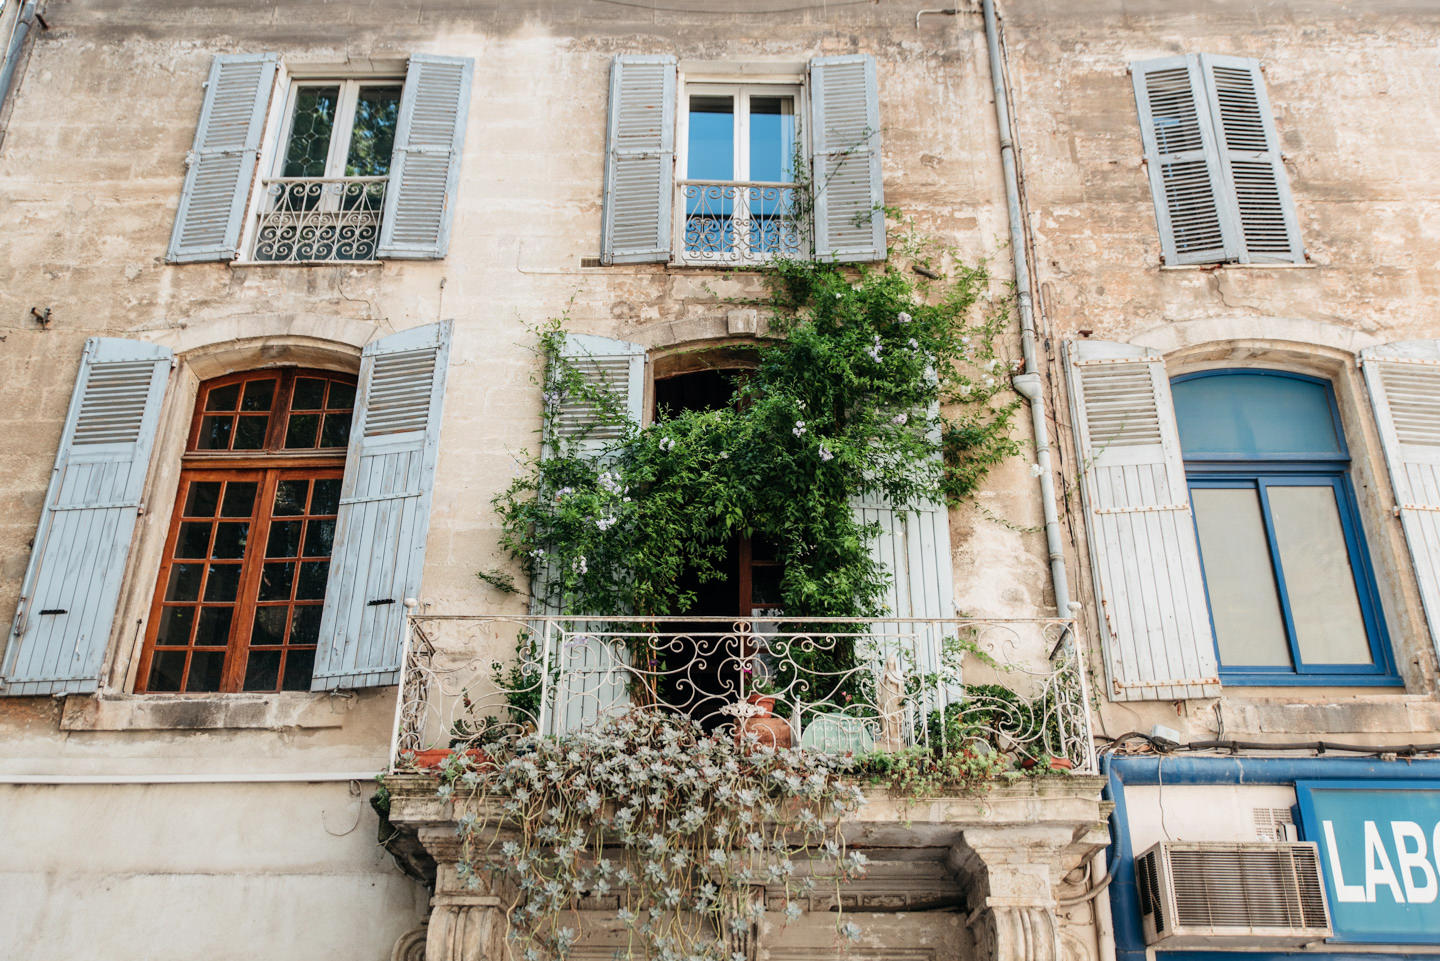 Blog-Mode-And-The-City-Lifestyle-Voyage-Avignon-Mas-Des-Herbes-Blanches-10